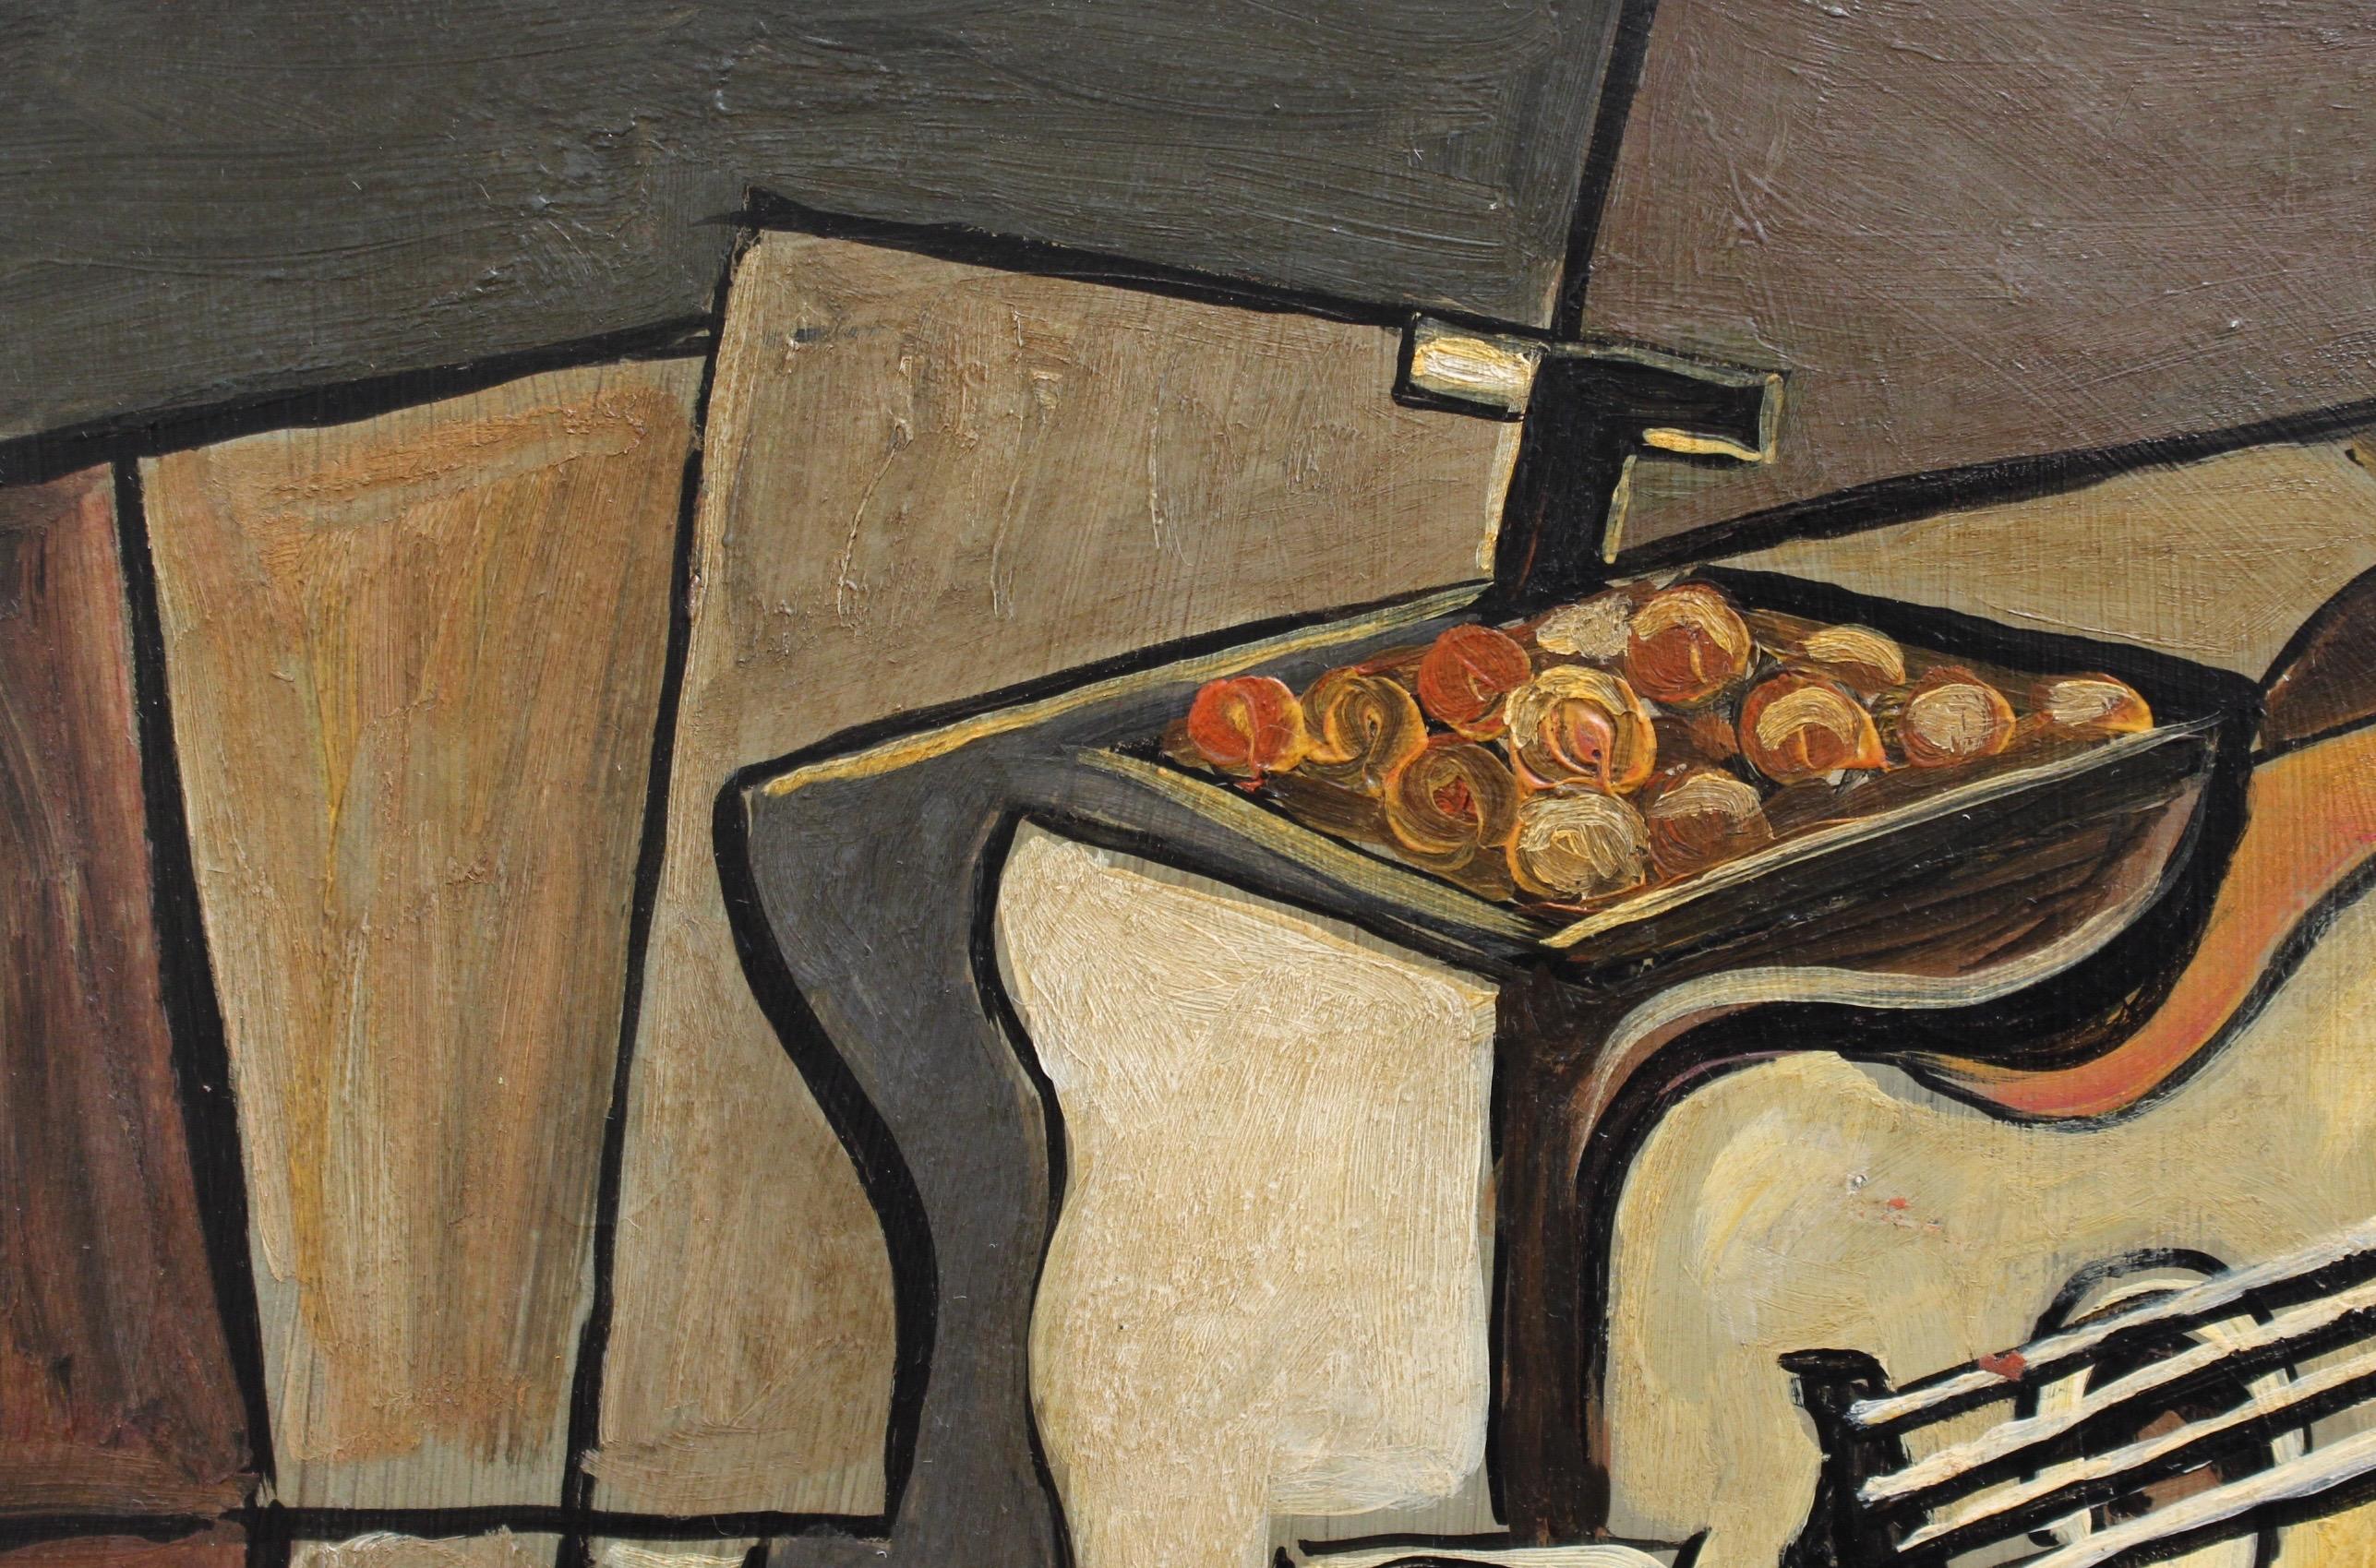 'Cubist Still Life on Table', oil on board, with guitar, bunch of grapes and carafe, (circa 1940s - 1960s), by artist with the initials J.G. A masterly cubist still life representation from J.G. This particular work depicts items atop a wooden table